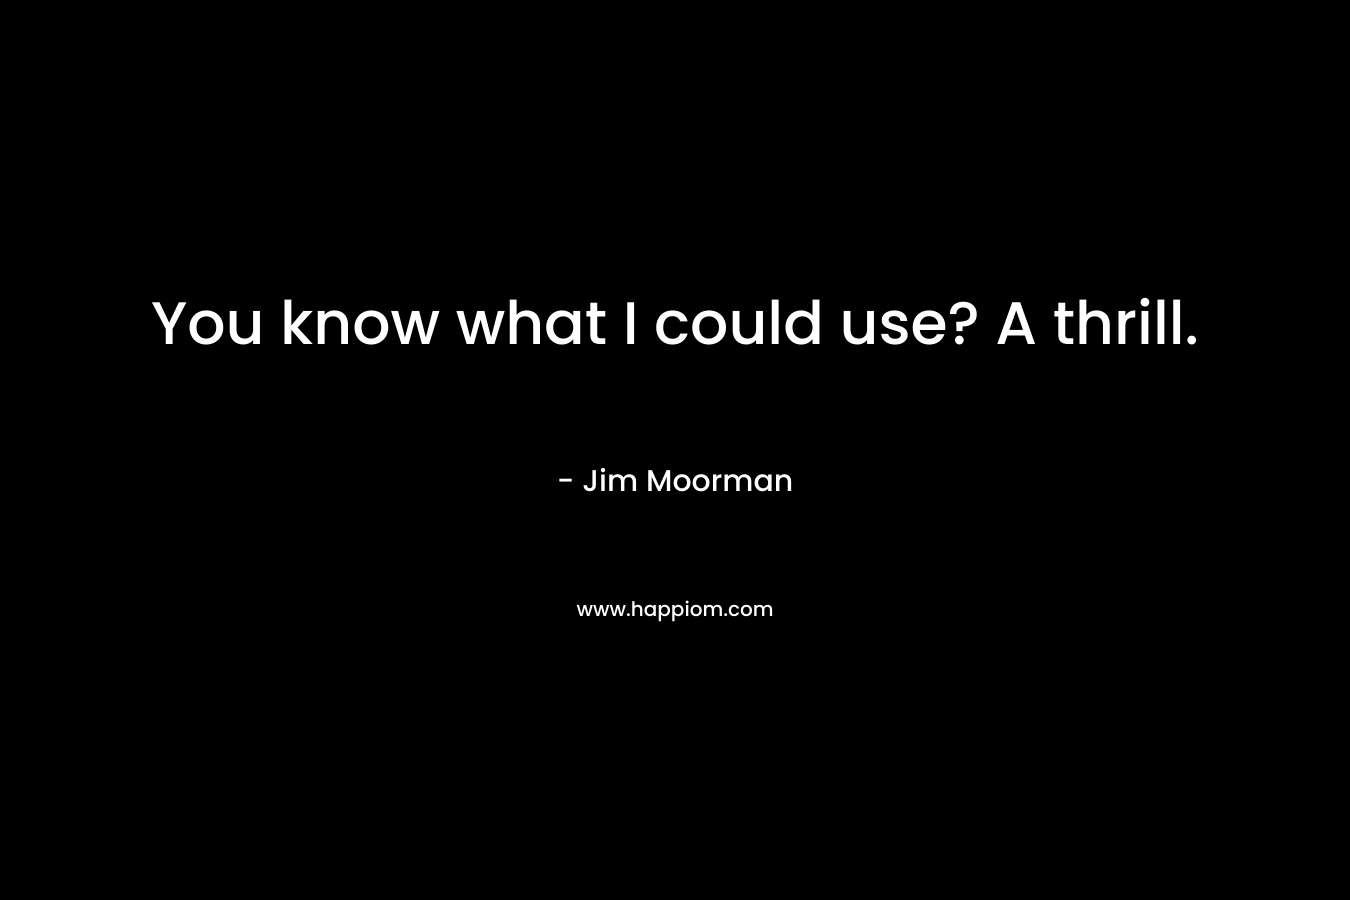 You know what I could use? A thrill. – Jim Moorman